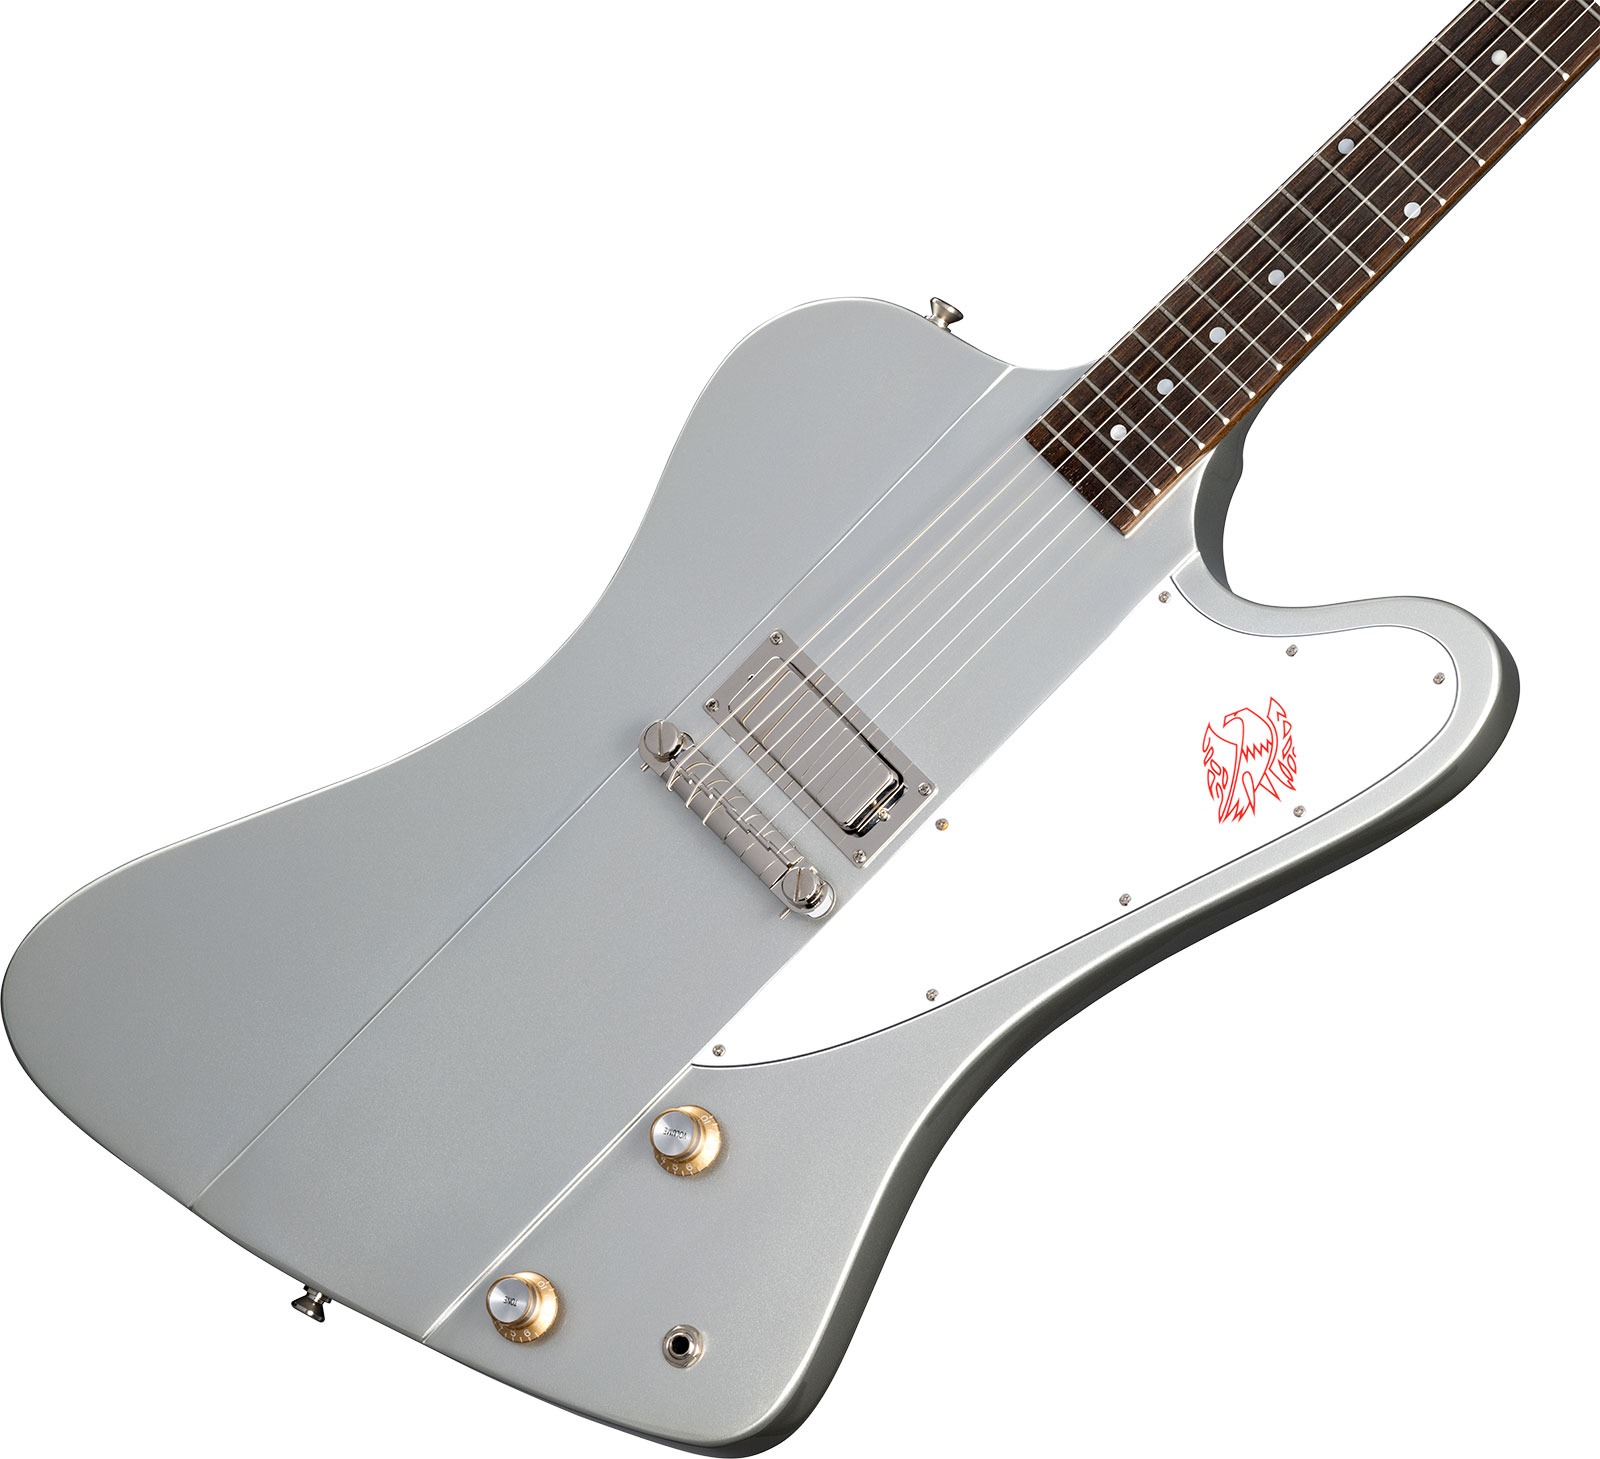 Epiphone Firebird I 1963 Inspired By Gibson Custom 1mh Ht Lau - Silver Mist - Retro rock electric guitar - Variation 3